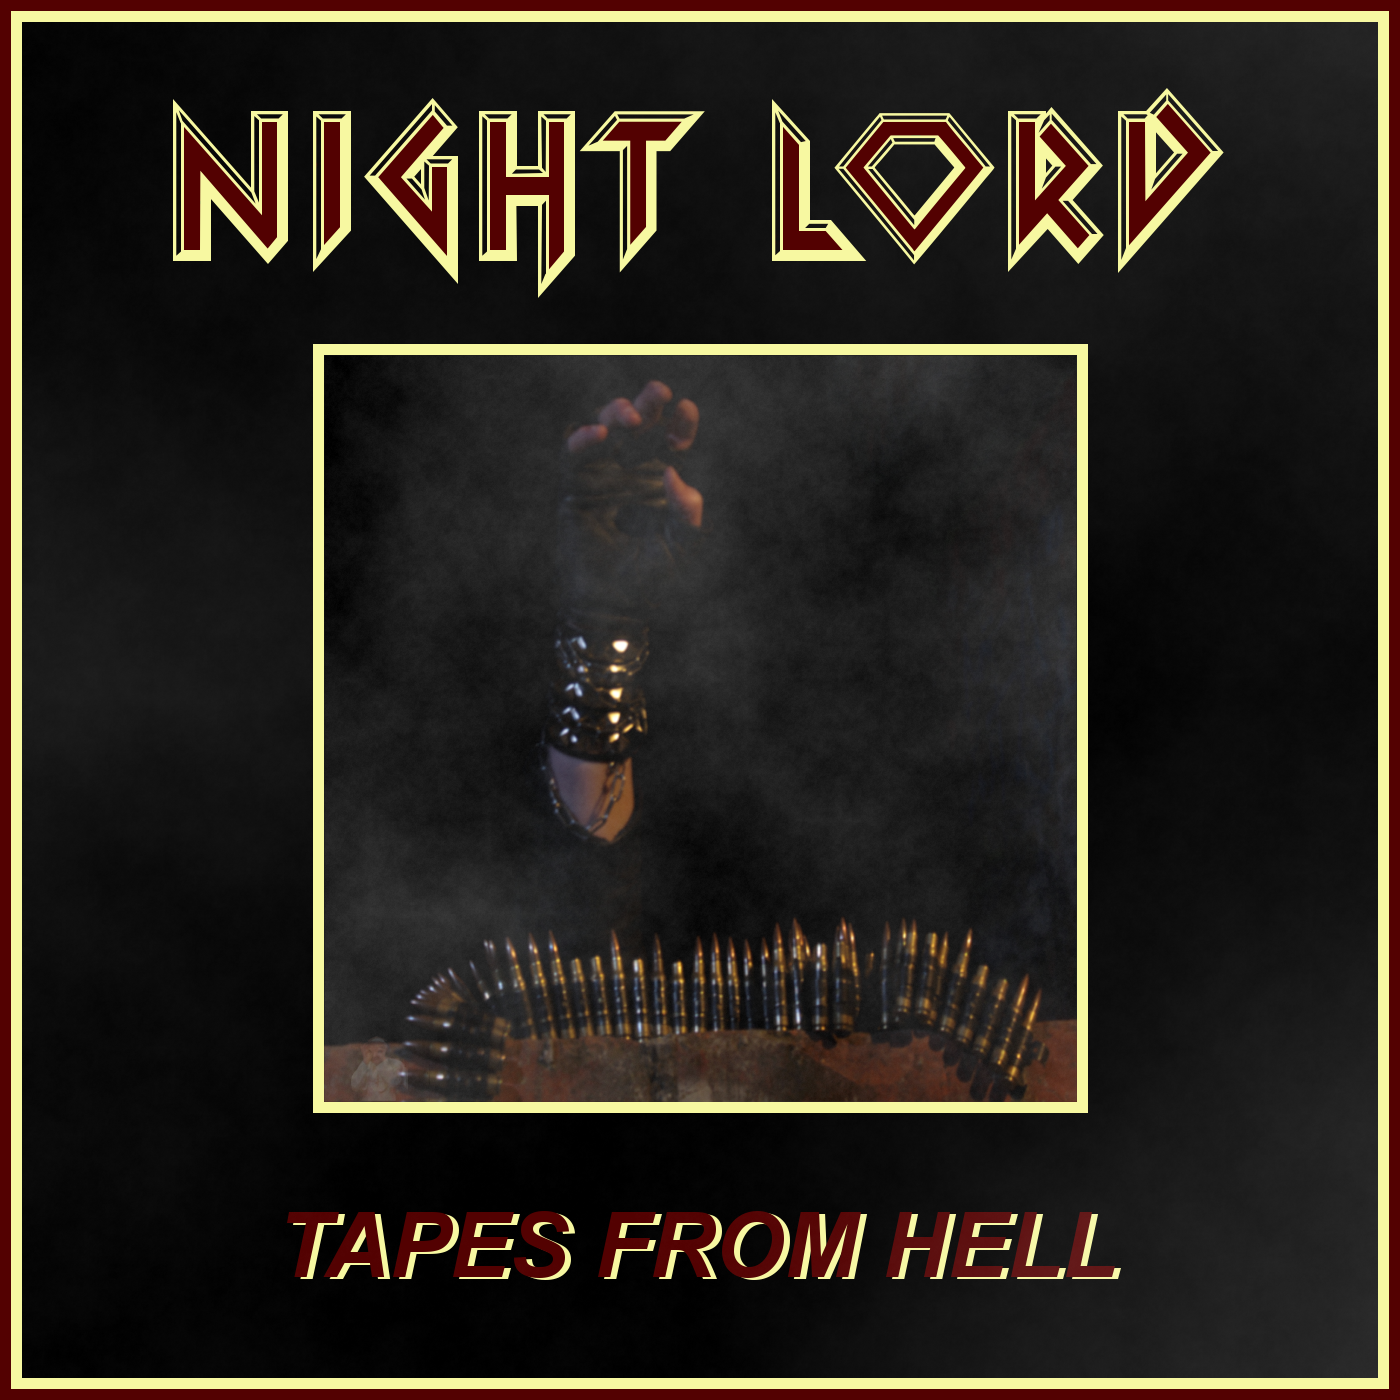 Interview with NIGHT LORD